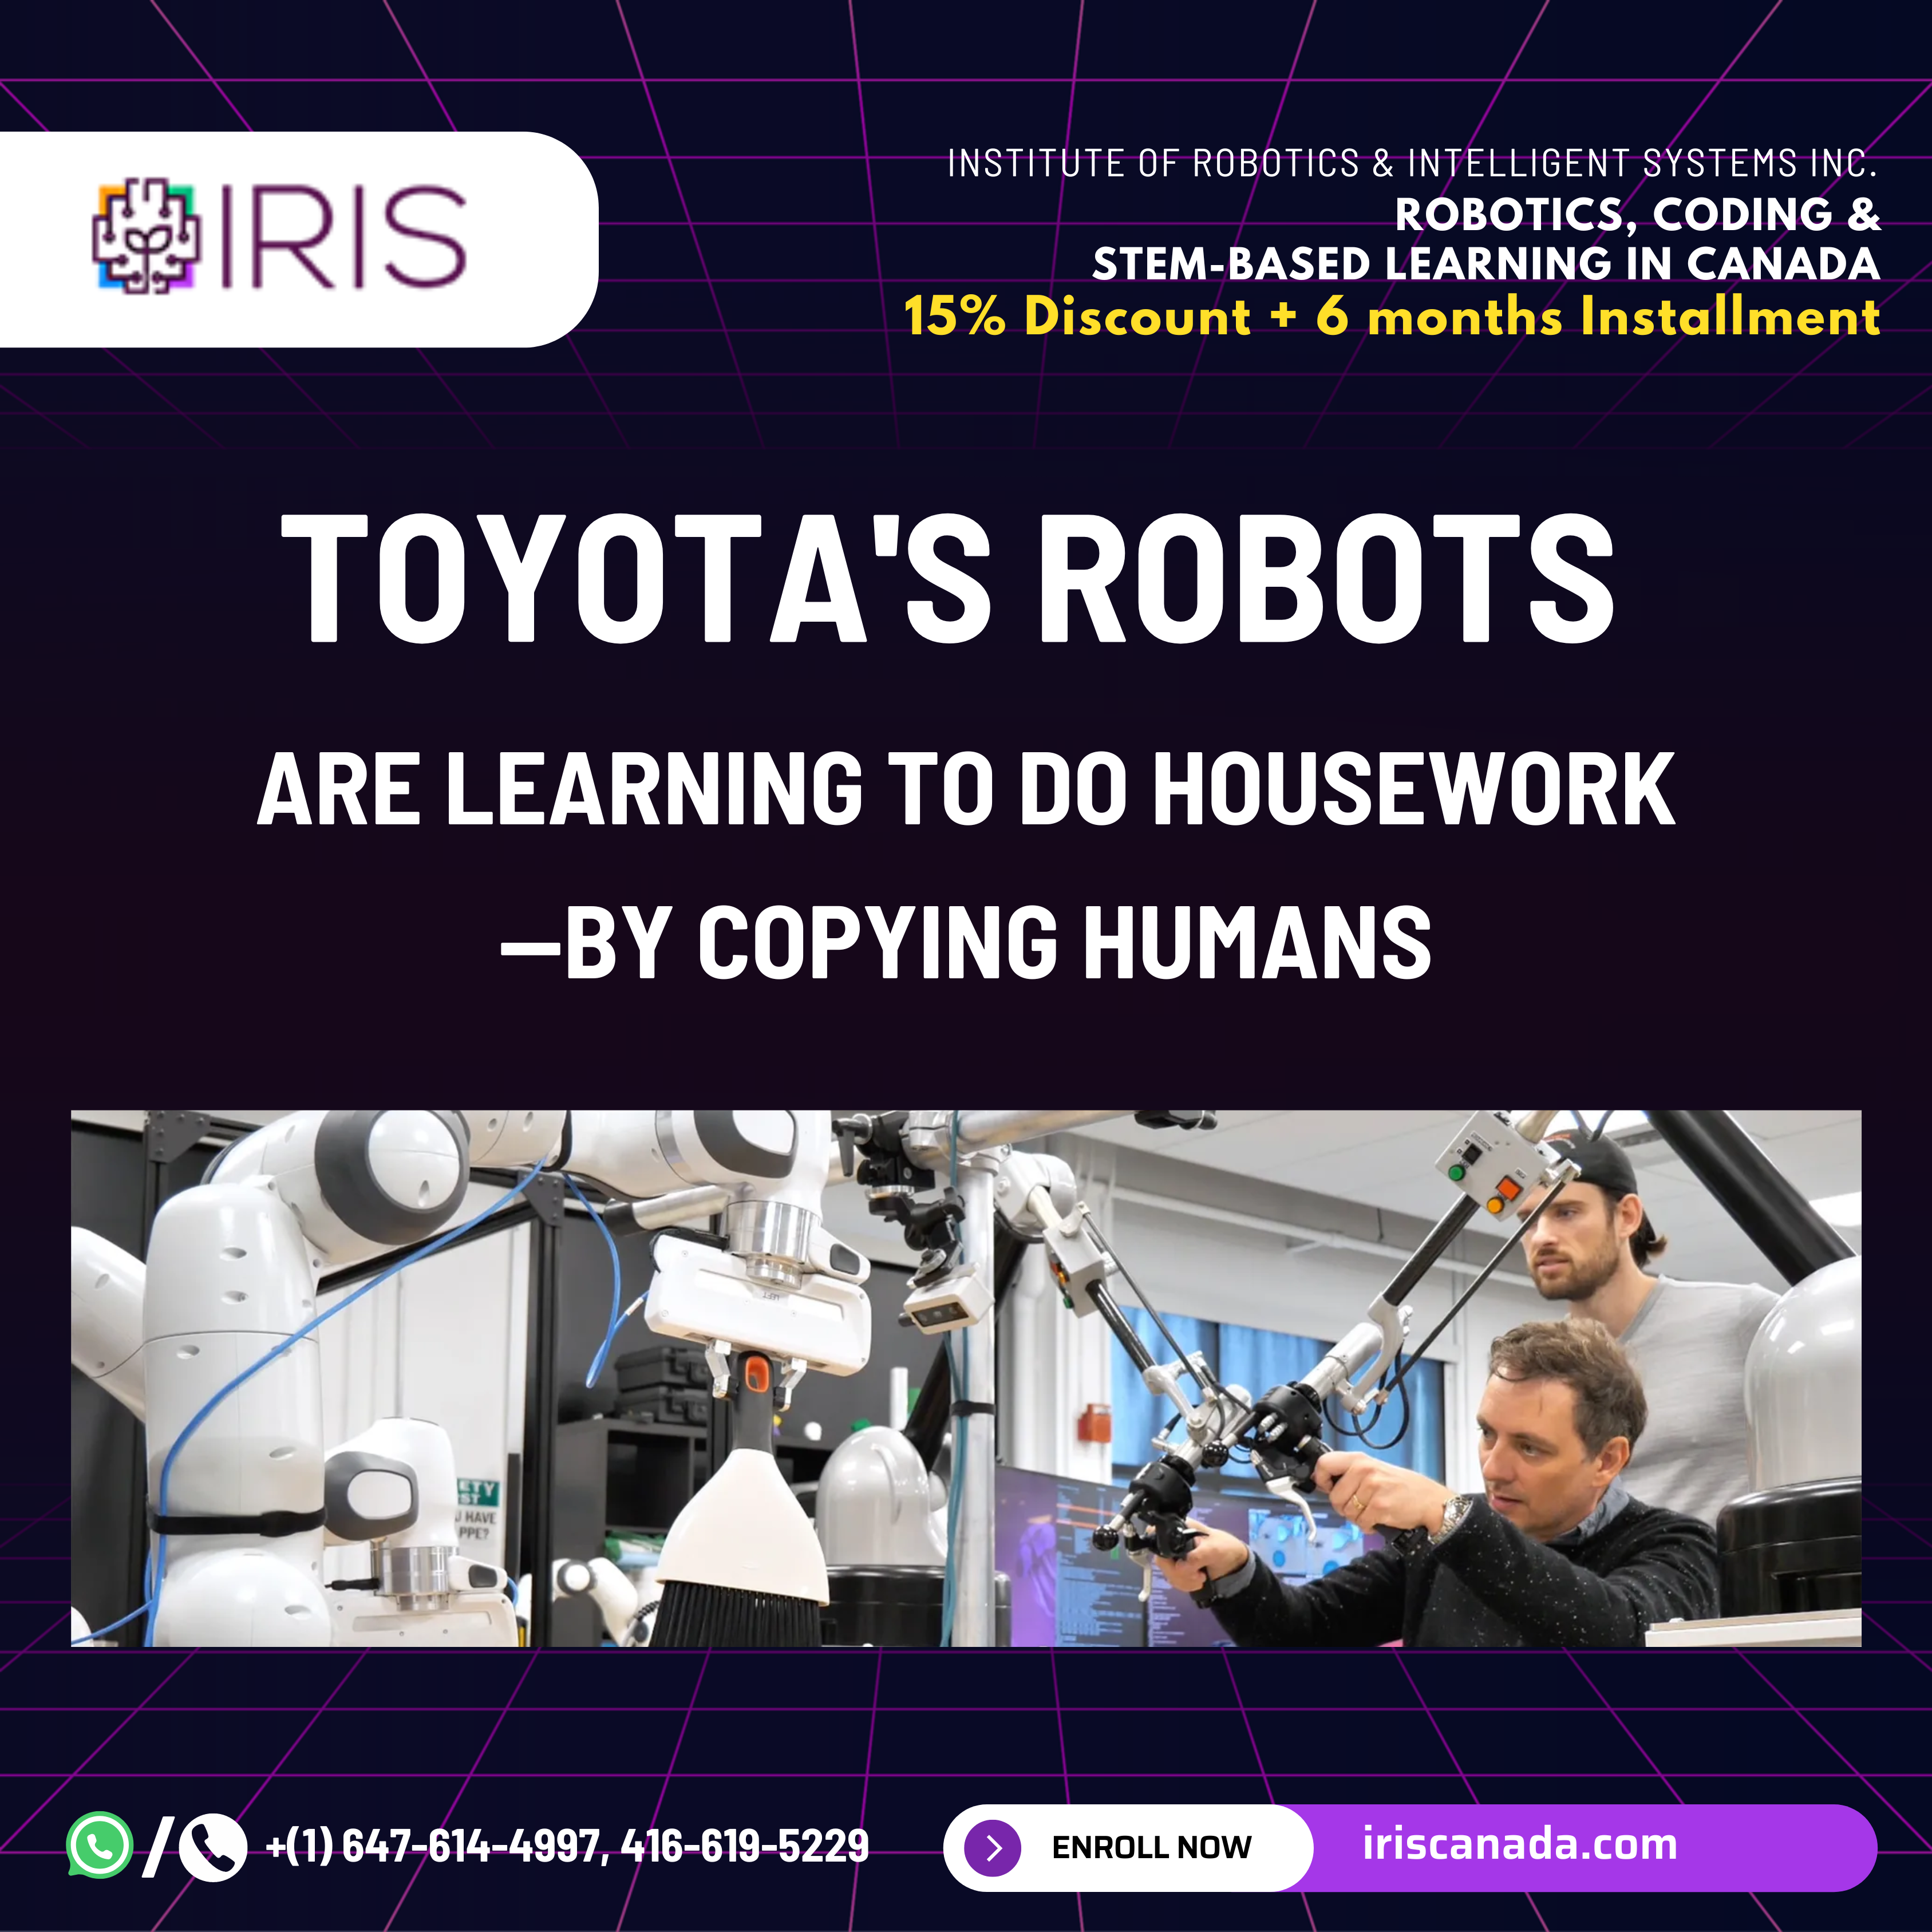 TOYOTA’S ROBOTSARE LEARNING TO DO HOUSEWORK-BY COPYING HUMANS